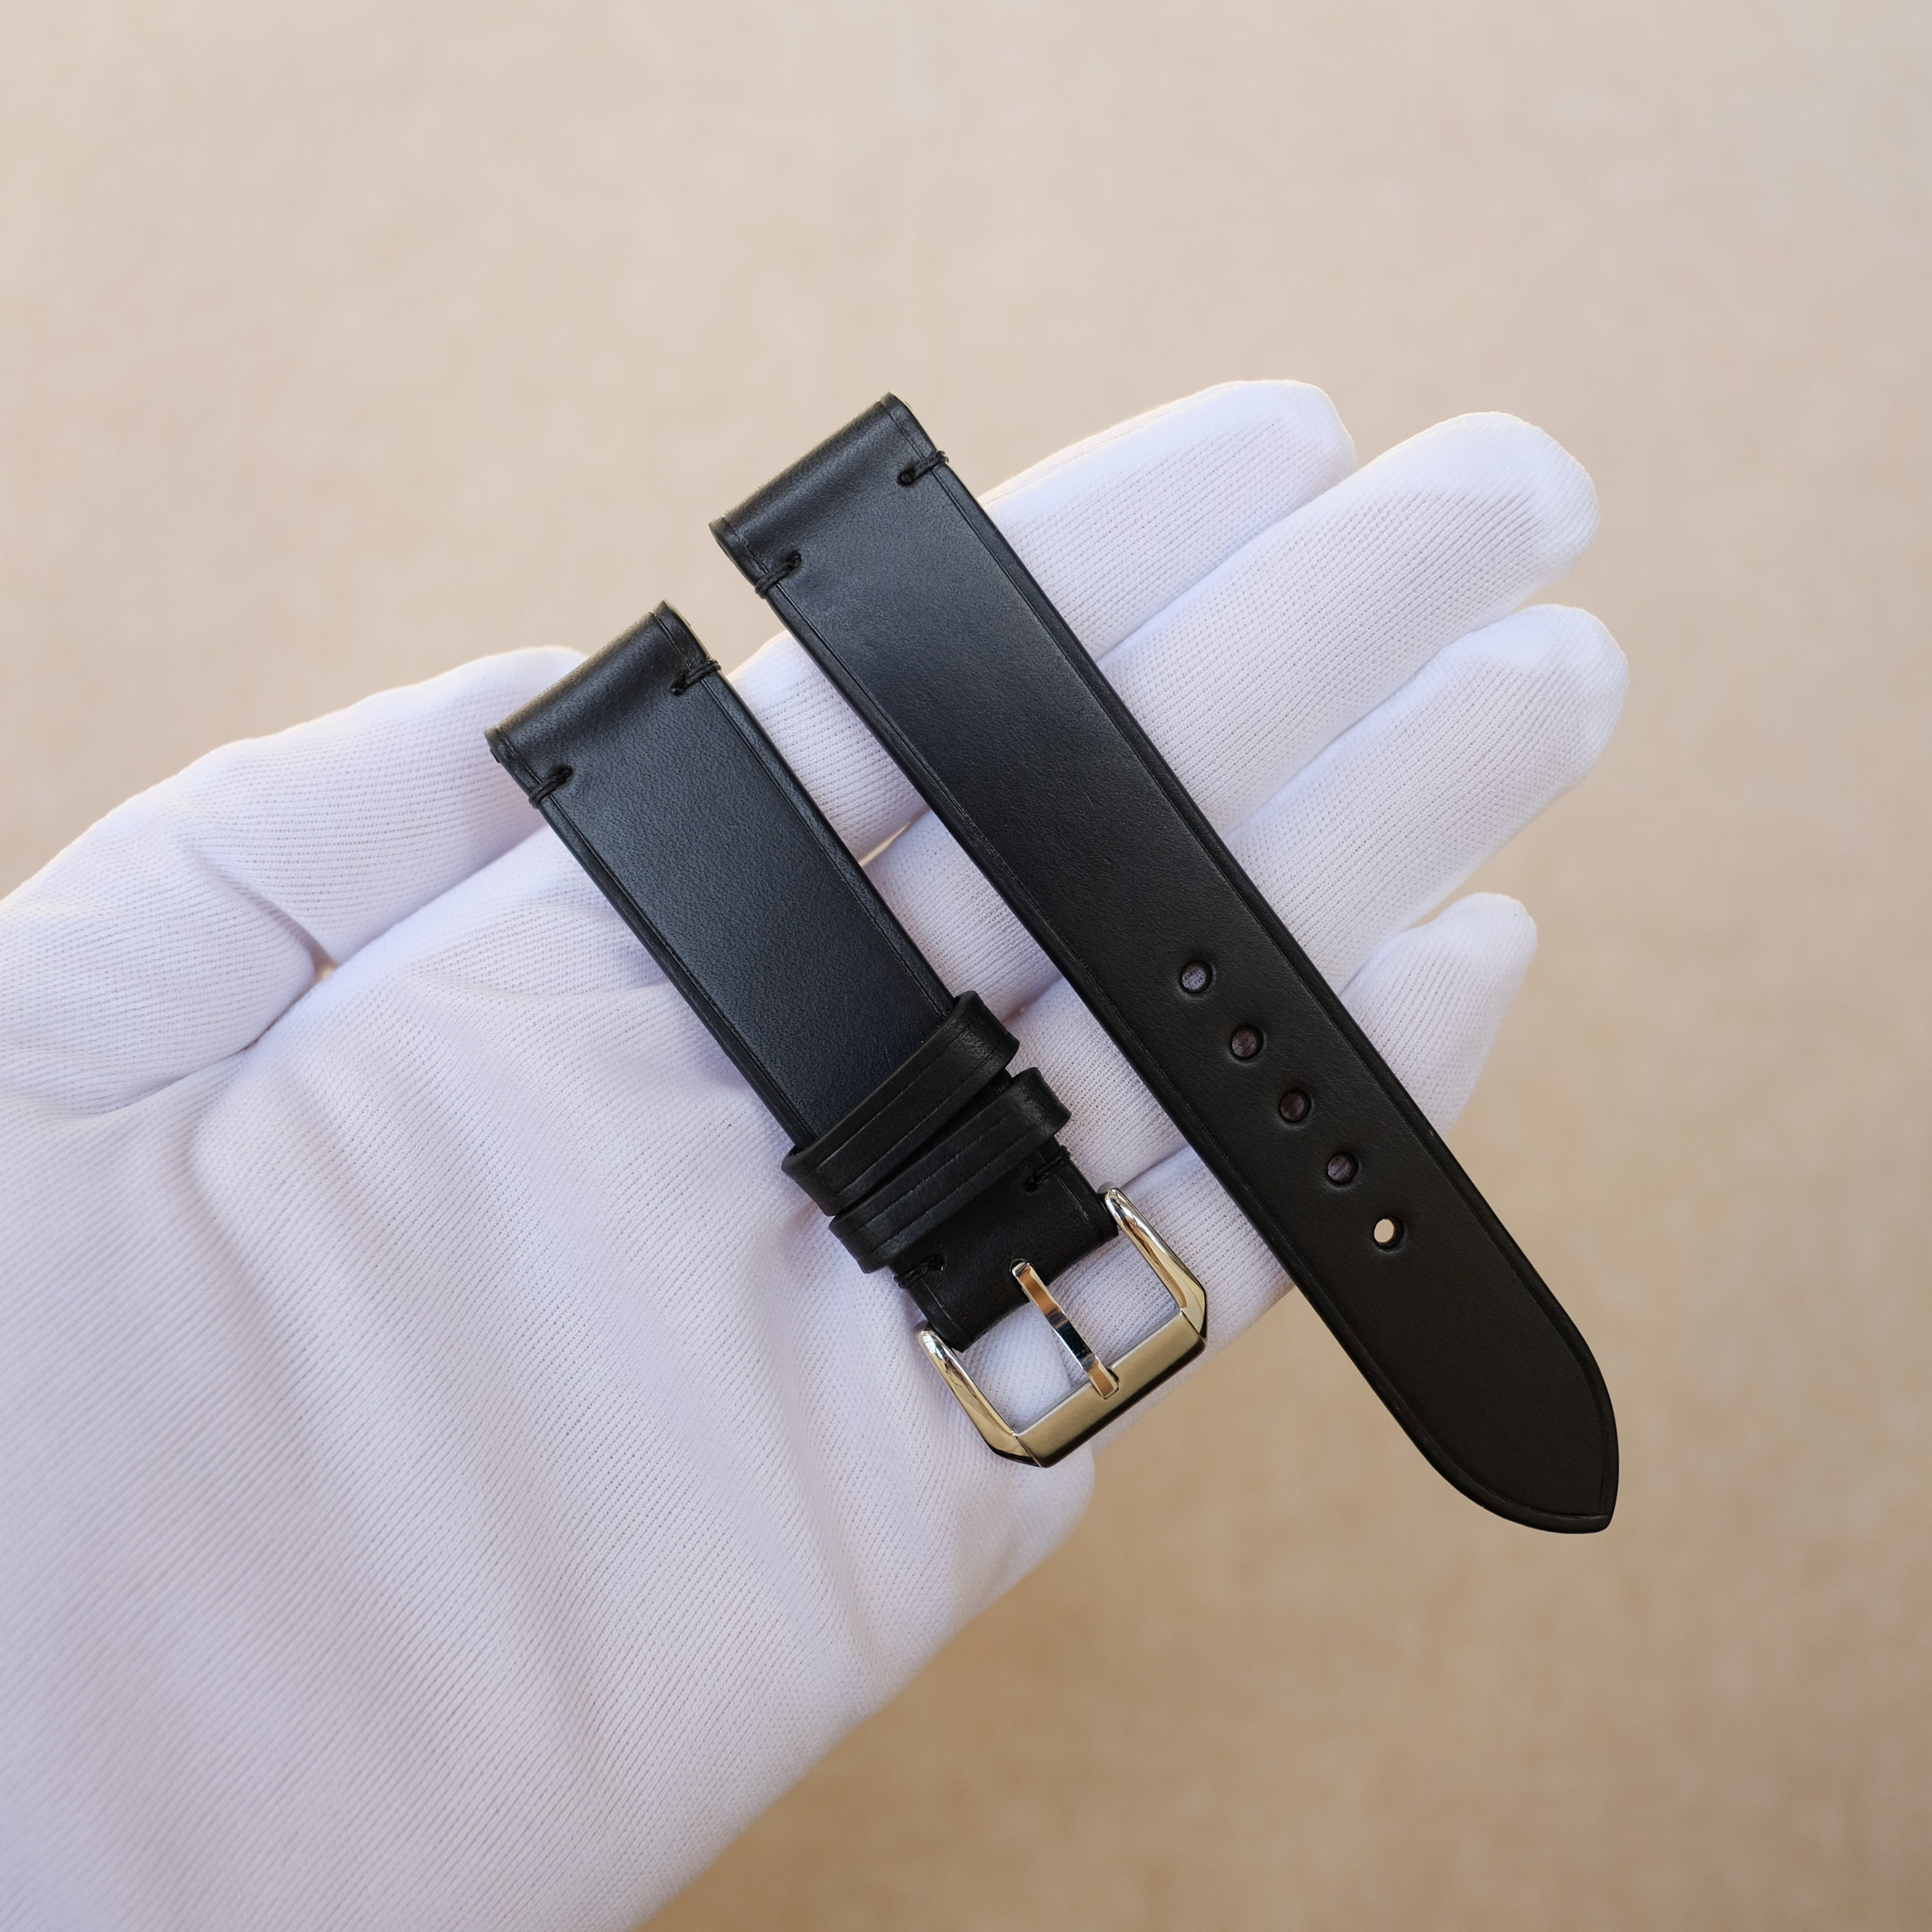 Buttero Black Leather Watch Strap 24mm, 22mm, 21mm, 20mm, 19mm, 18mm, 17mm,  16mm, 14mm, 12mm 